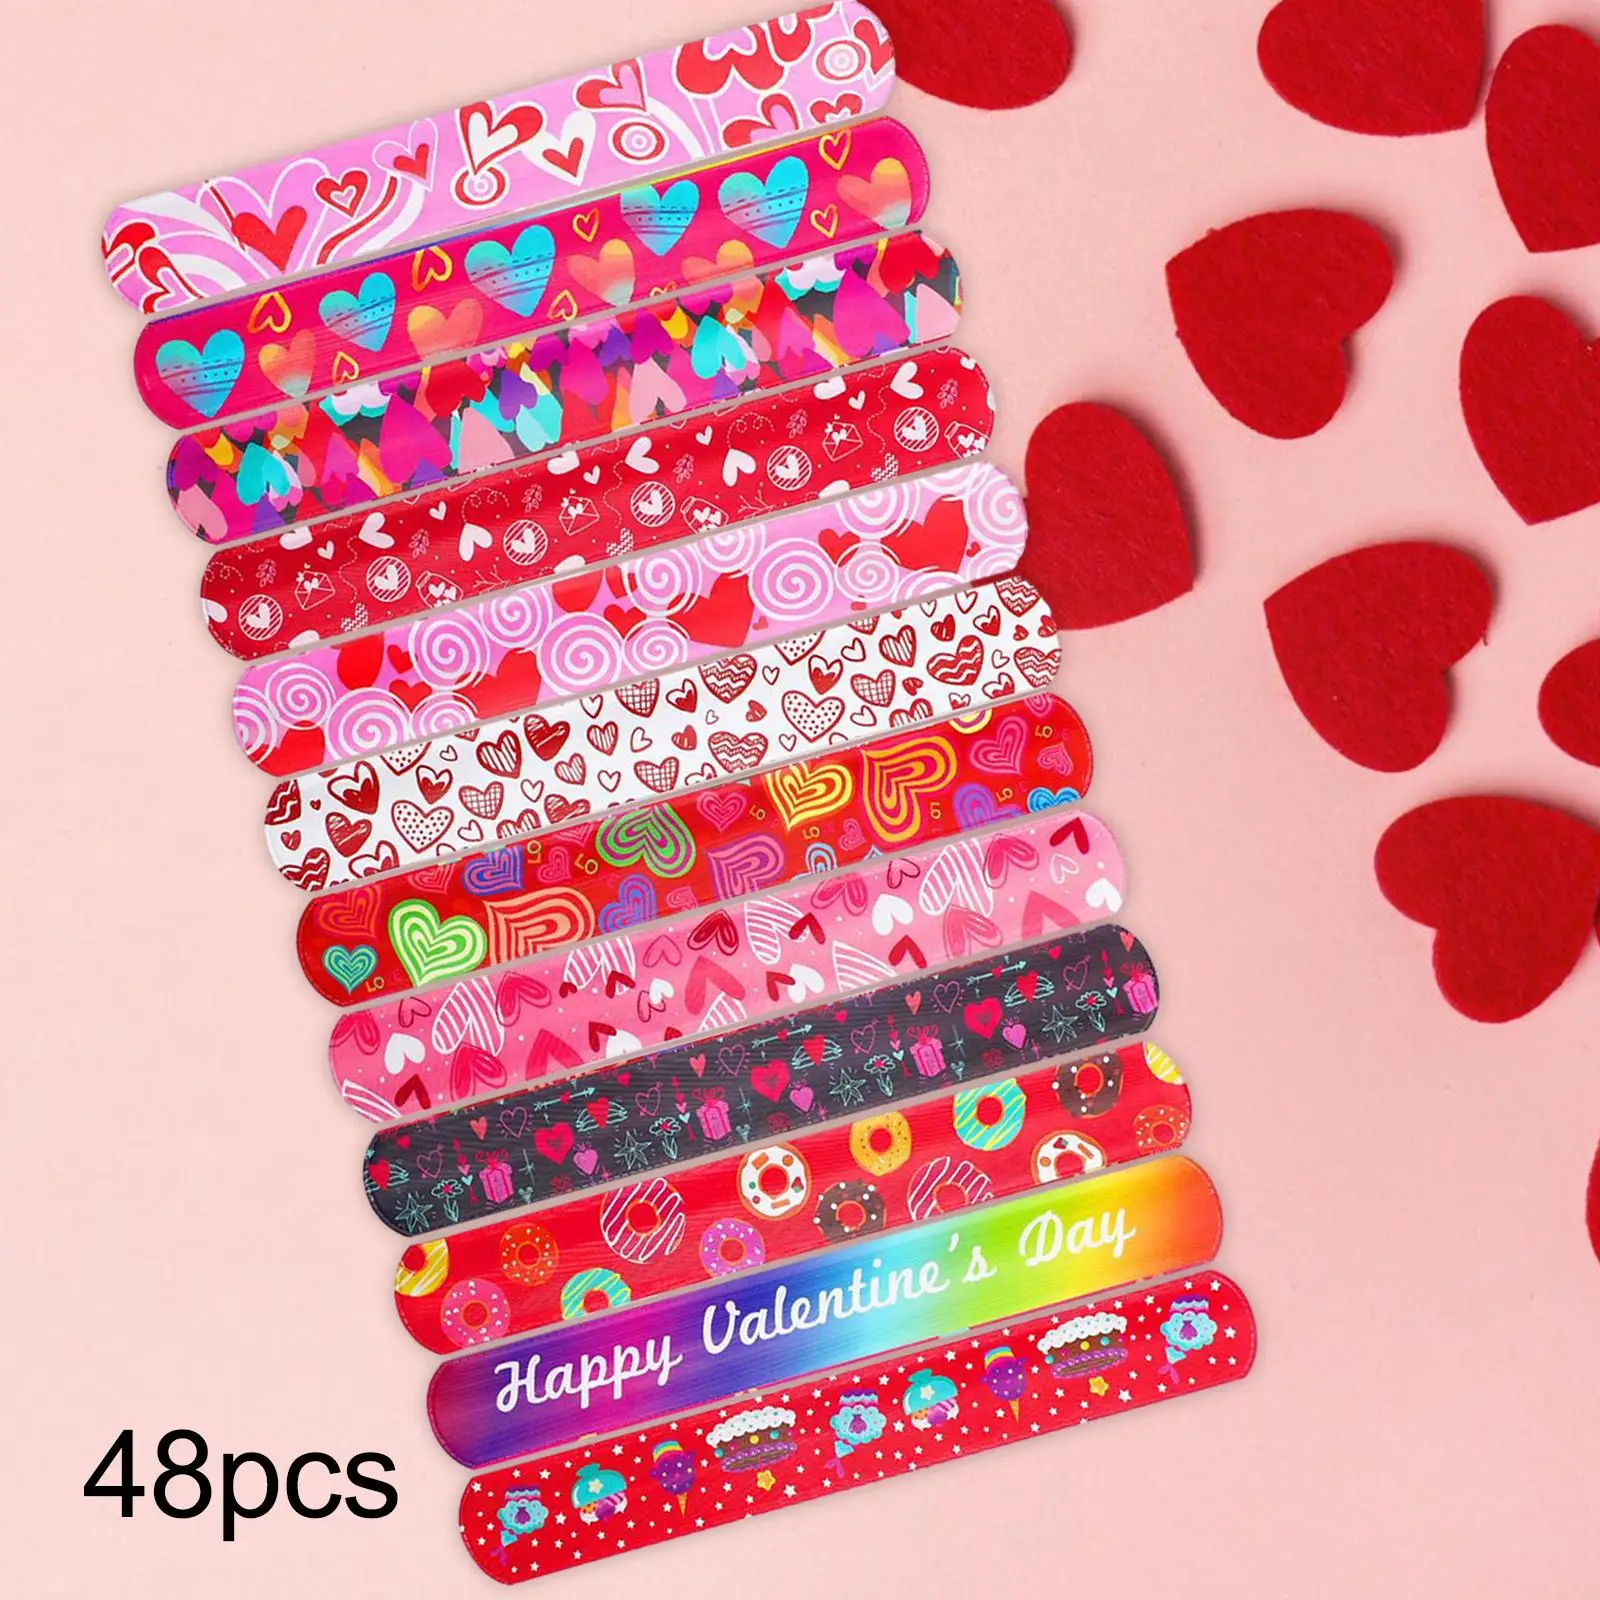 48 Pieces Valentine`s Day Slap Bracelets Toy Colorful Heart Design Gift Exchange Wrap Around Toy Slap Band for Boys Kids Adults